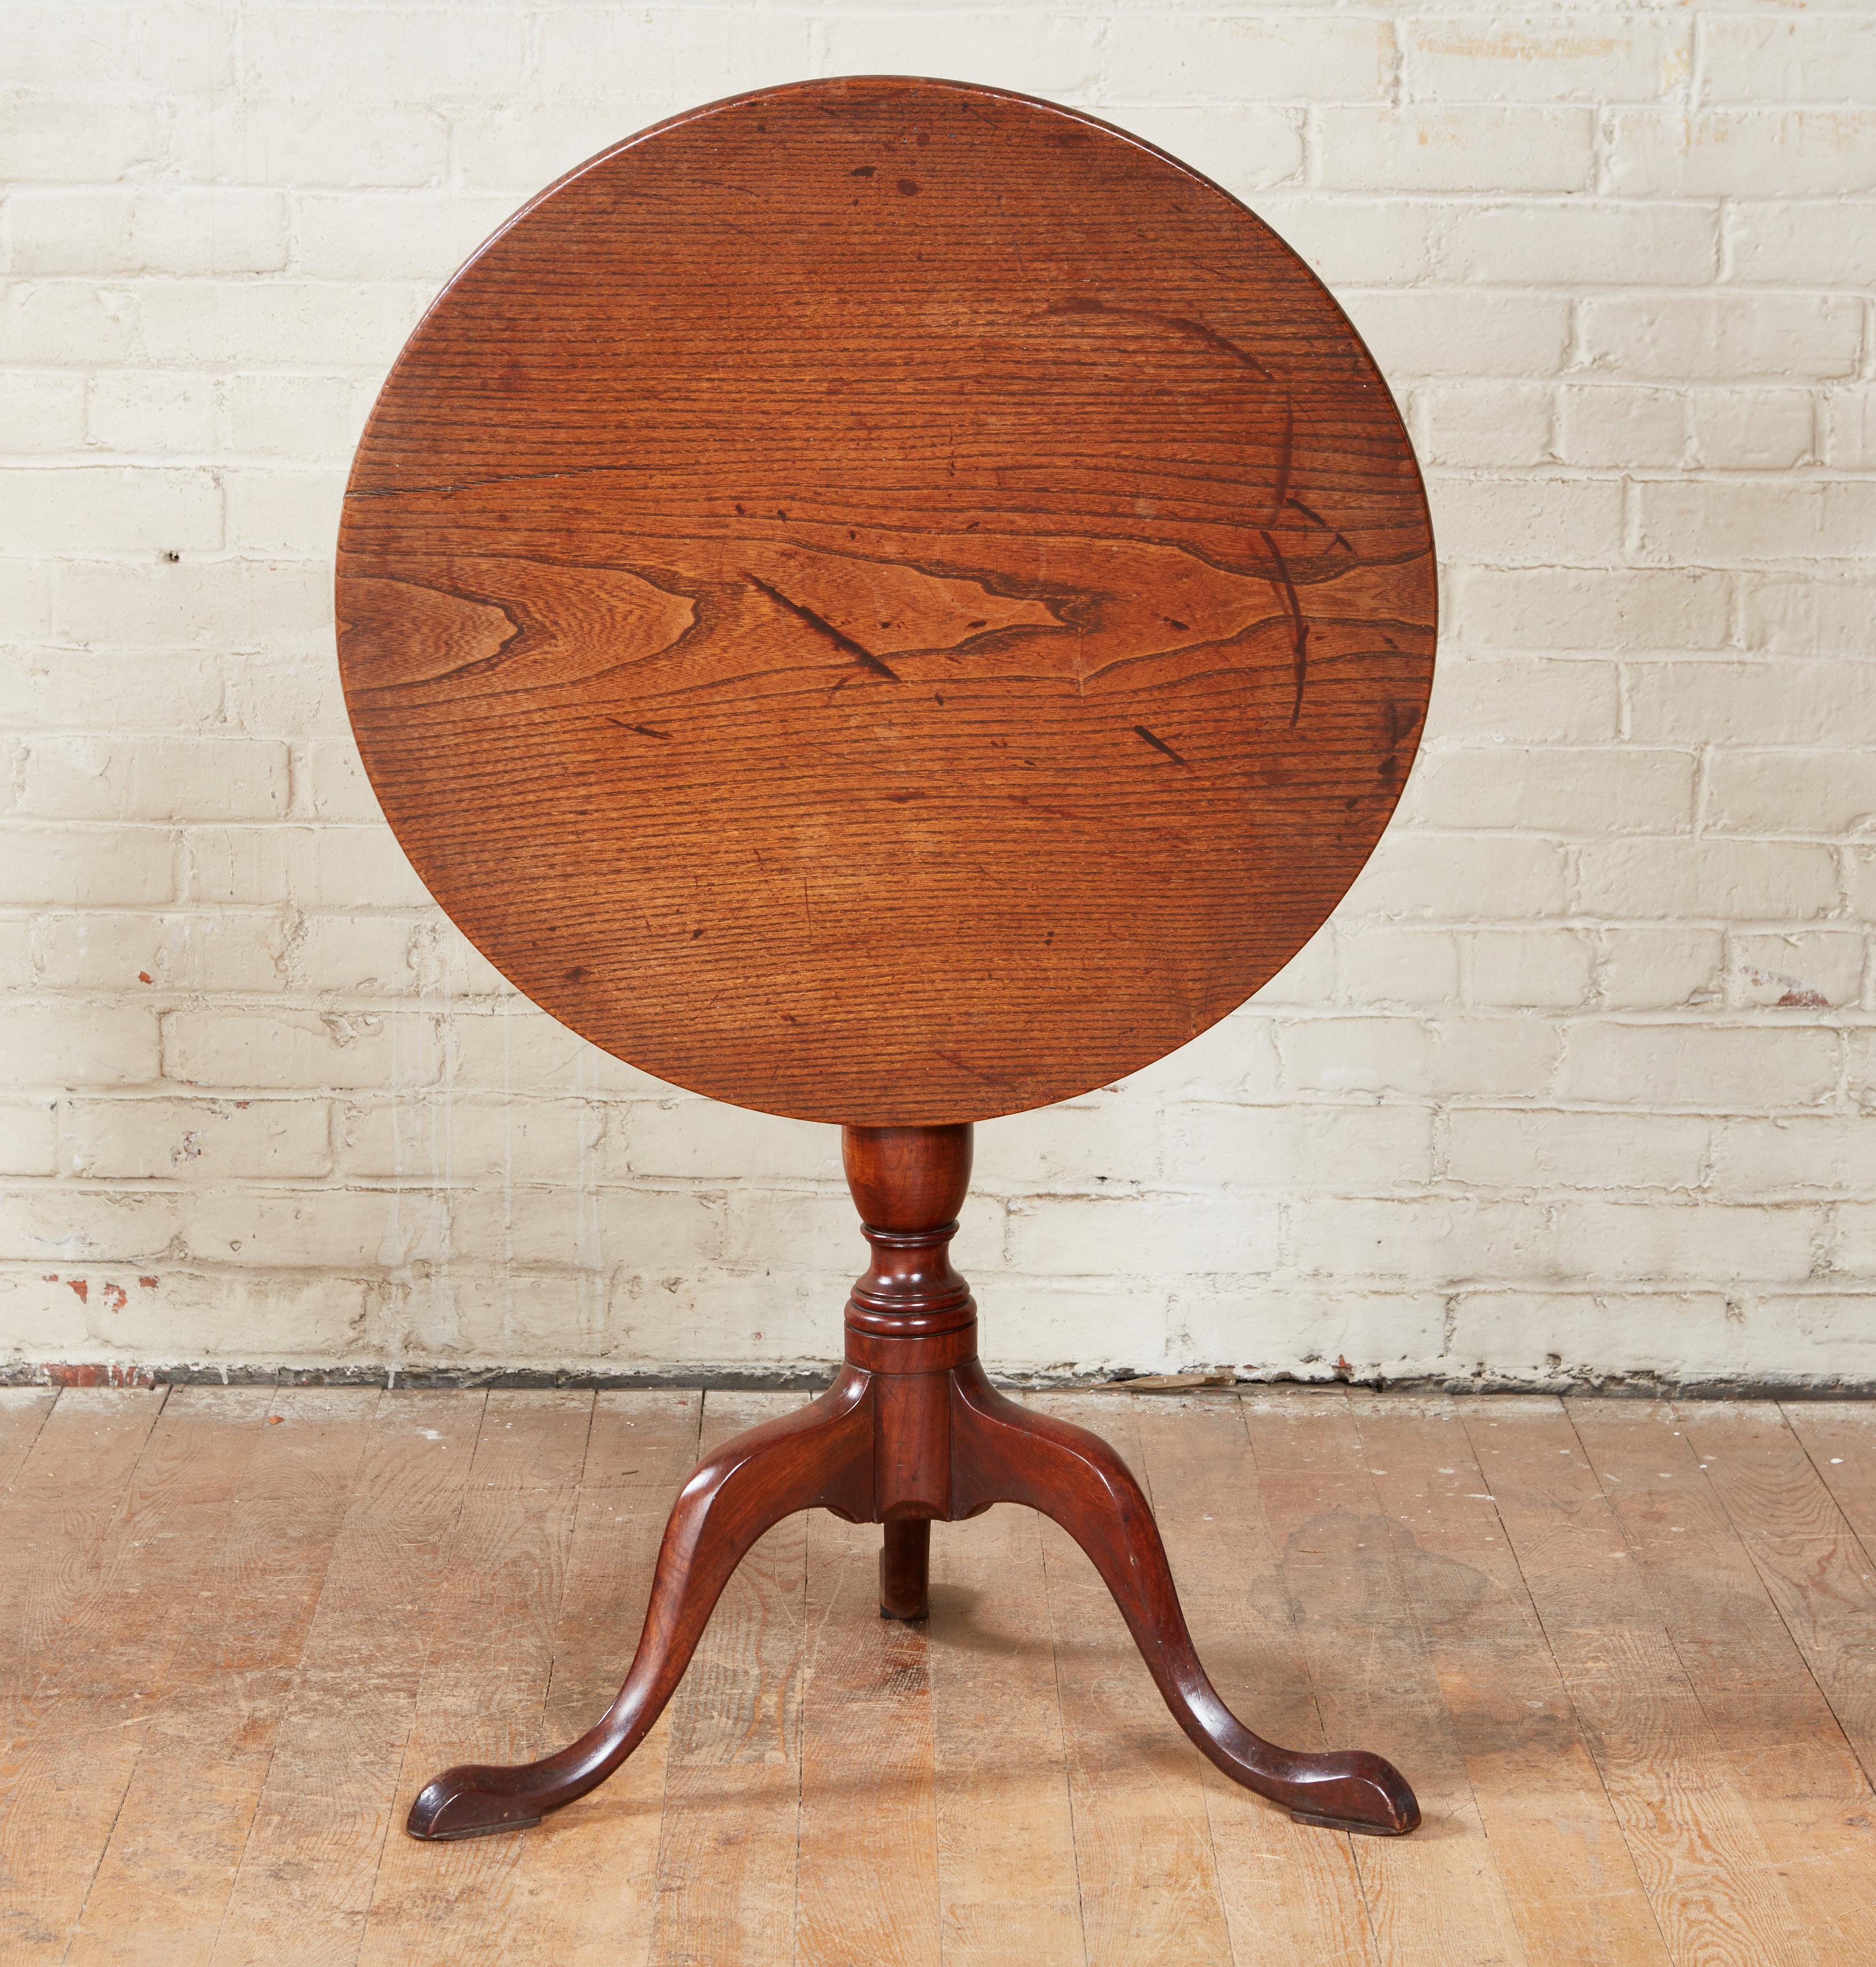 Good 18th century English country tilt top tripod table having single plank elm top over balustrade turned stem standing on shapely slipper feet, the whole with pleasing old surface and patina and retaining original blacksmith made iron latch.